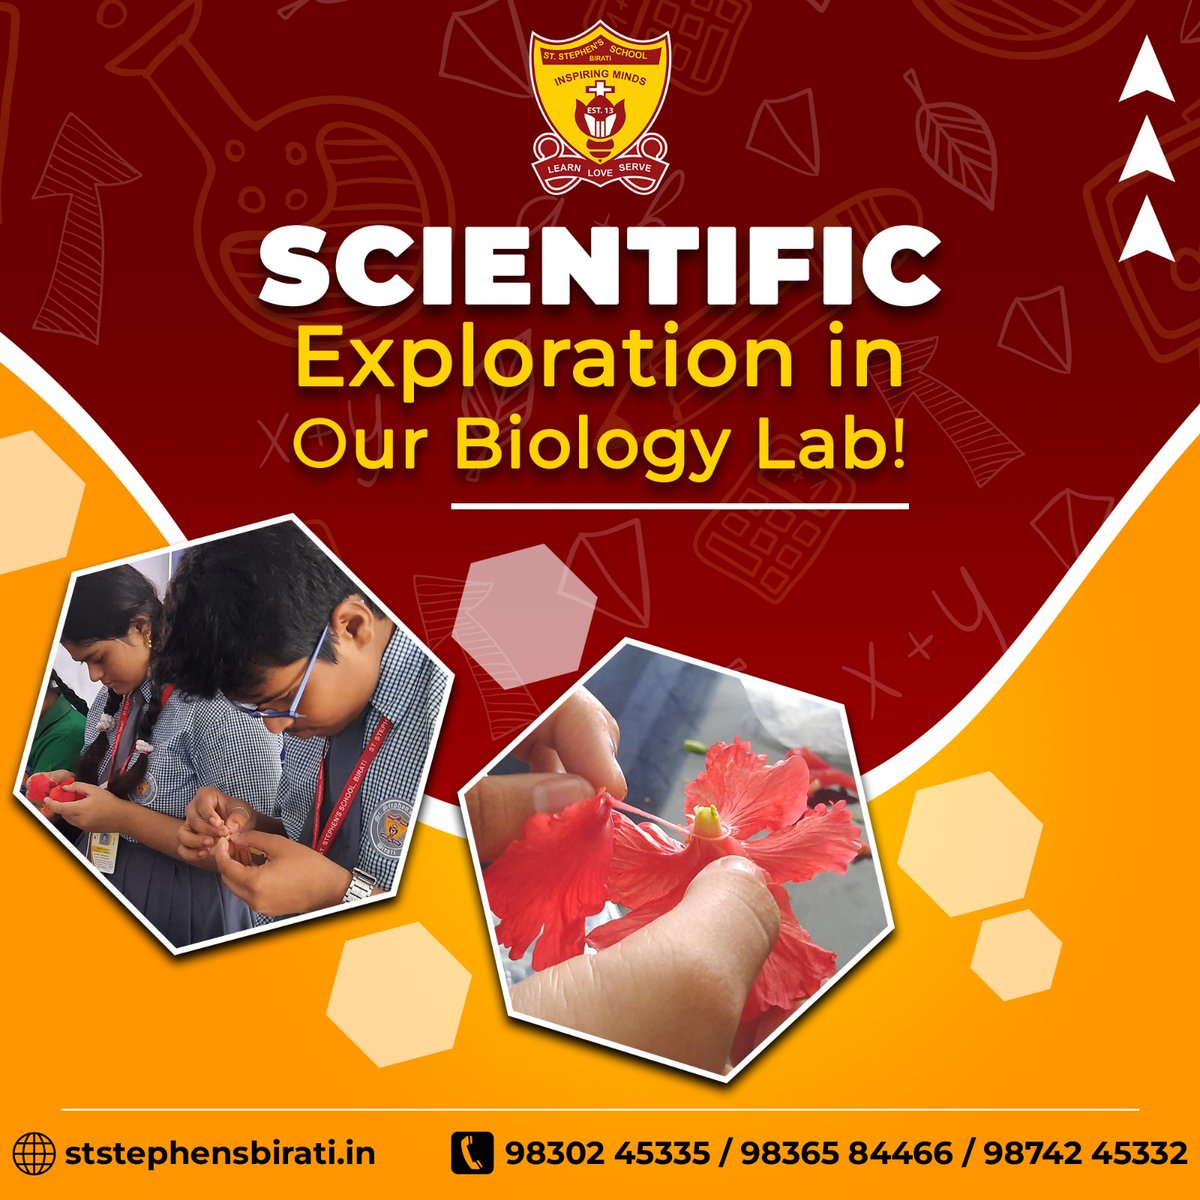 Witness our budding biologists in action as they explore exciting experiments in our biology lab. ststephensbirati.in #StStephensSchool #StStephensSchoolBirati #ICSESchool #ICSEAffiliatedSchool #BiologyLab #HandsonLearning #Stateoftheartinfrastructure #Biology